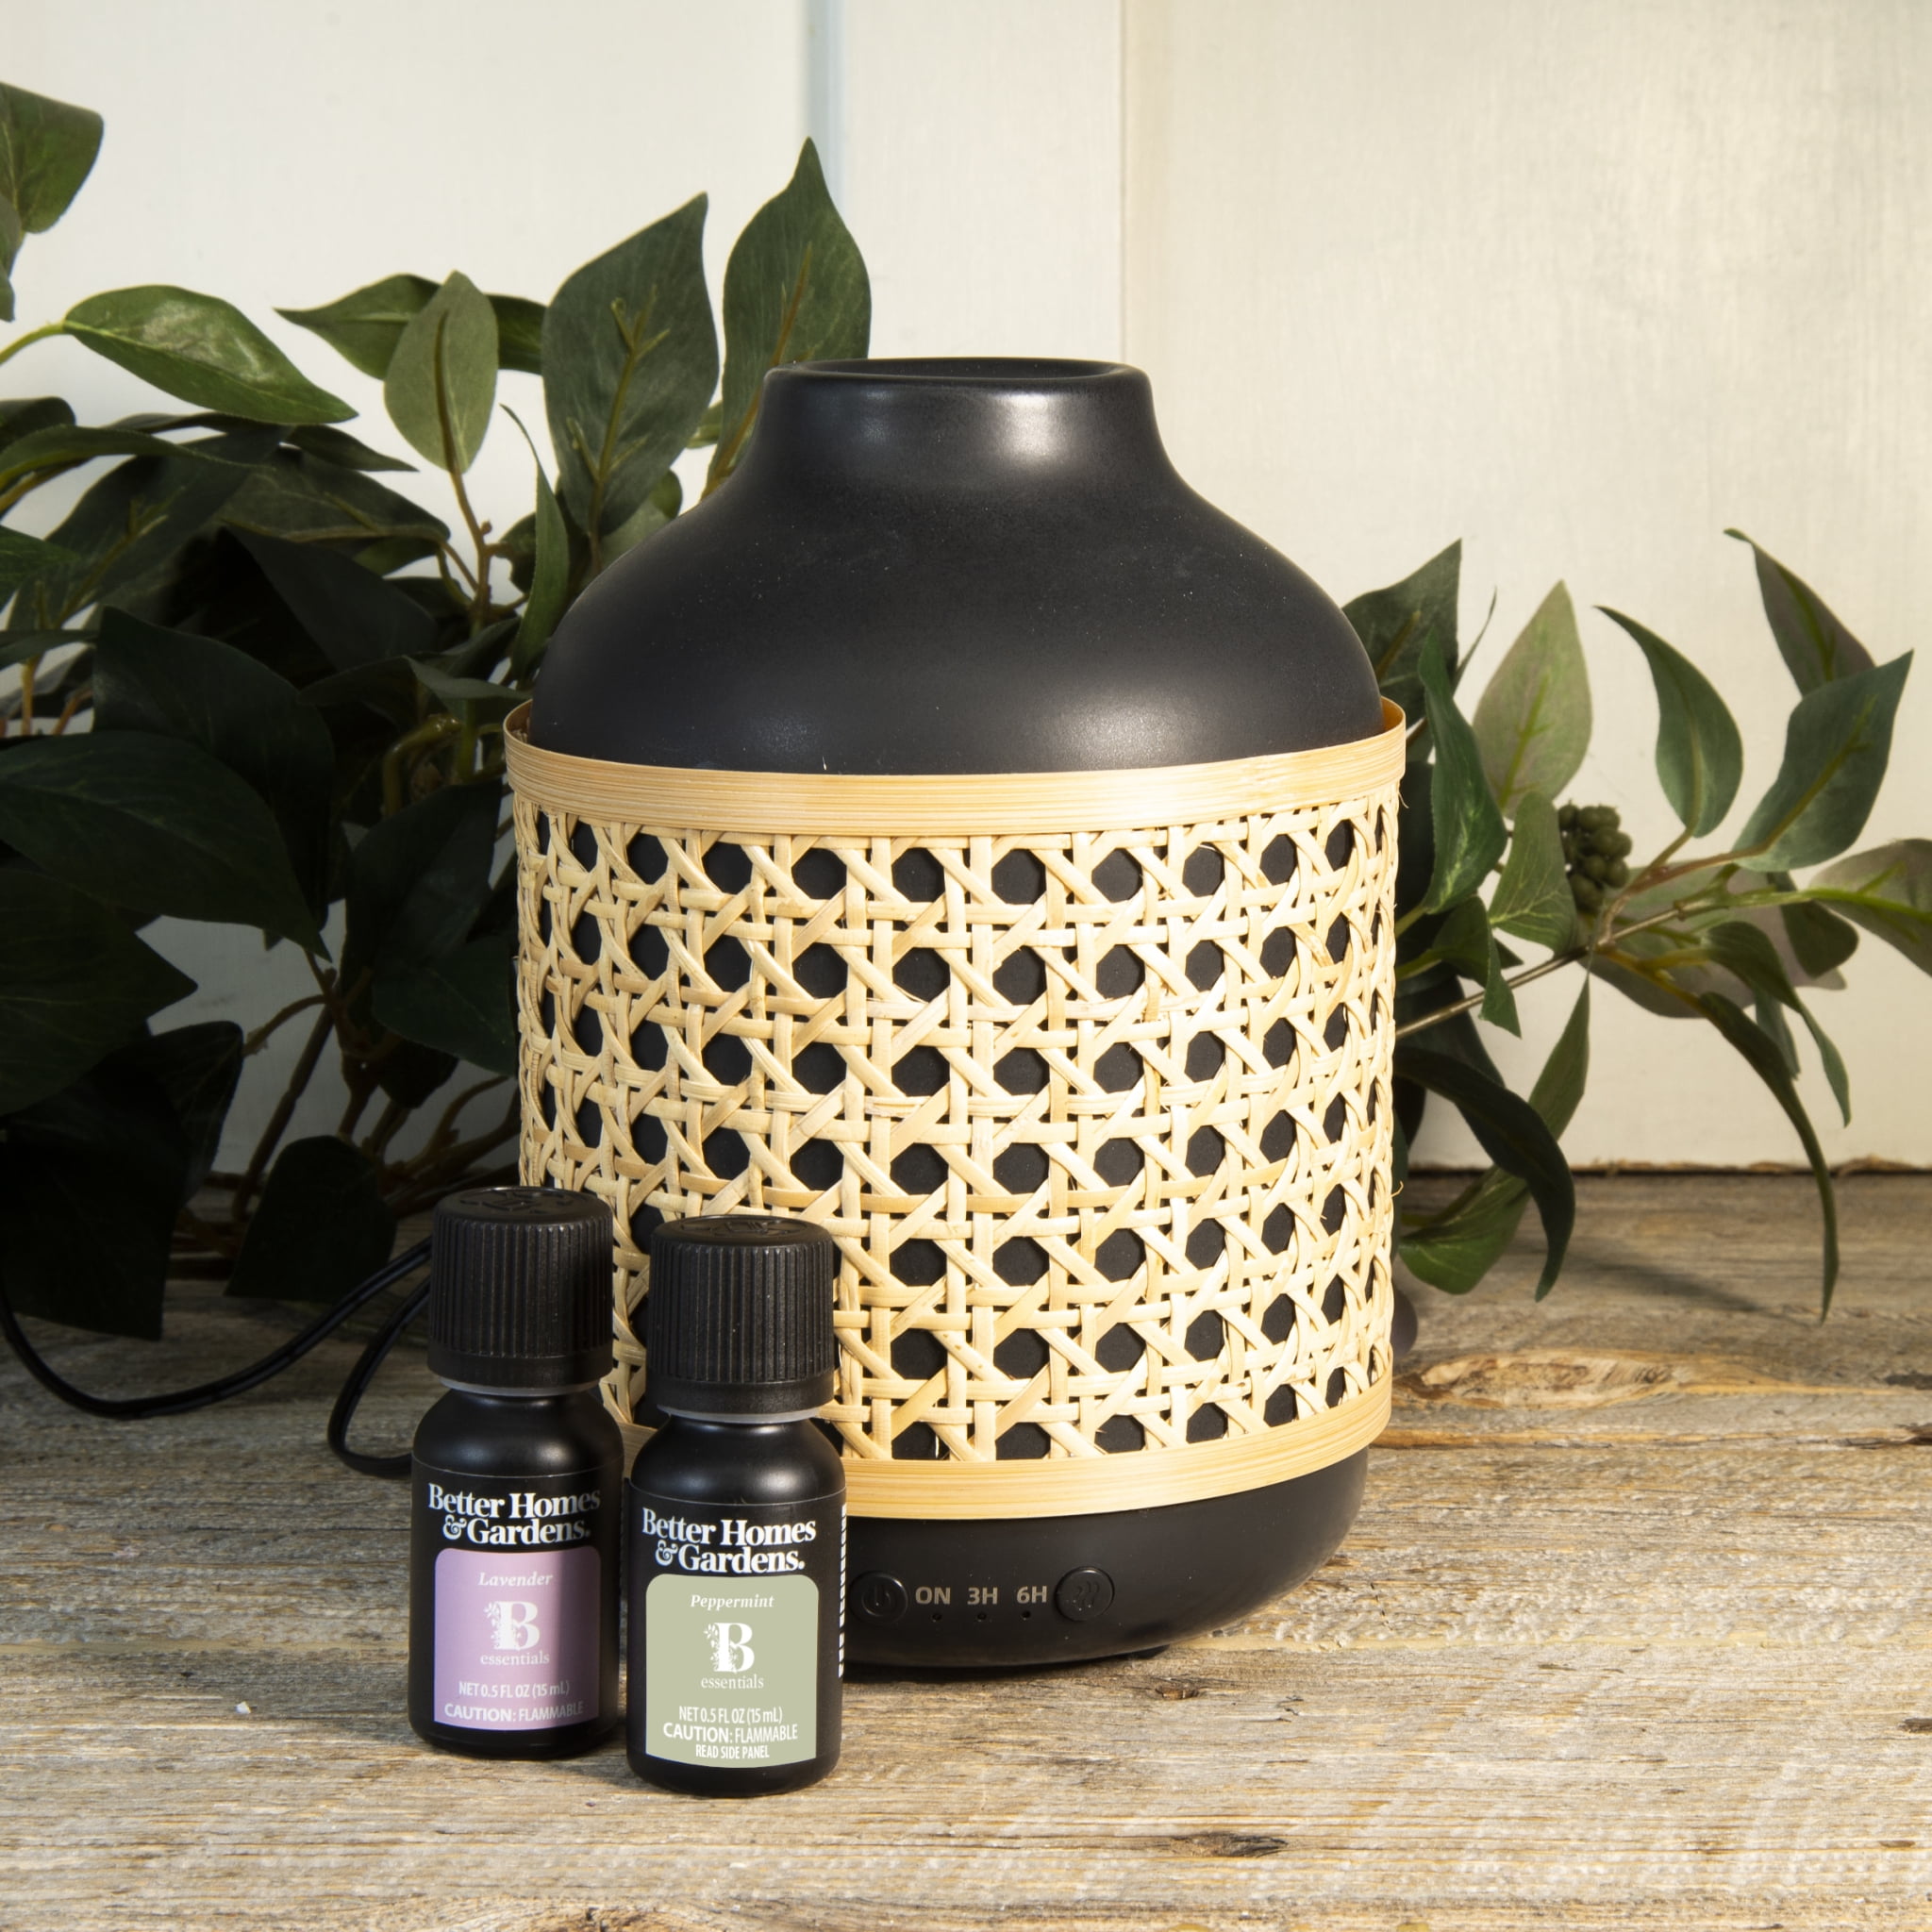 Better Homes & Gardens Cool Mist Ultrasonic Aroma Diffuser 3 Piece Set,  Black Caning, 250 mL